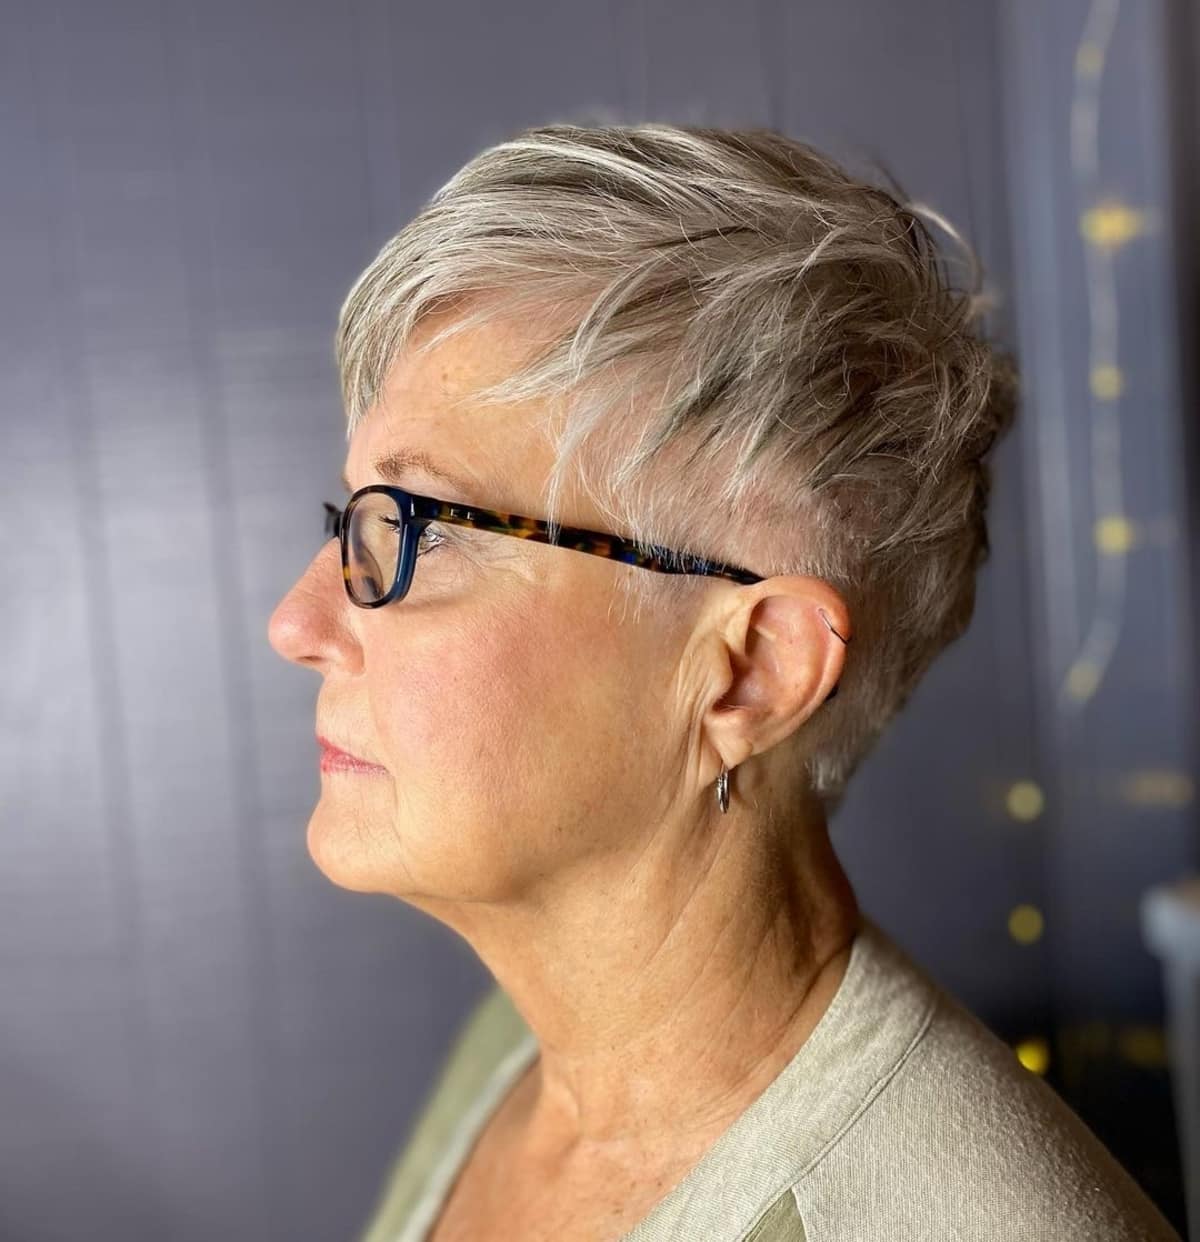 Edgy pixie for women over 60 with glasses